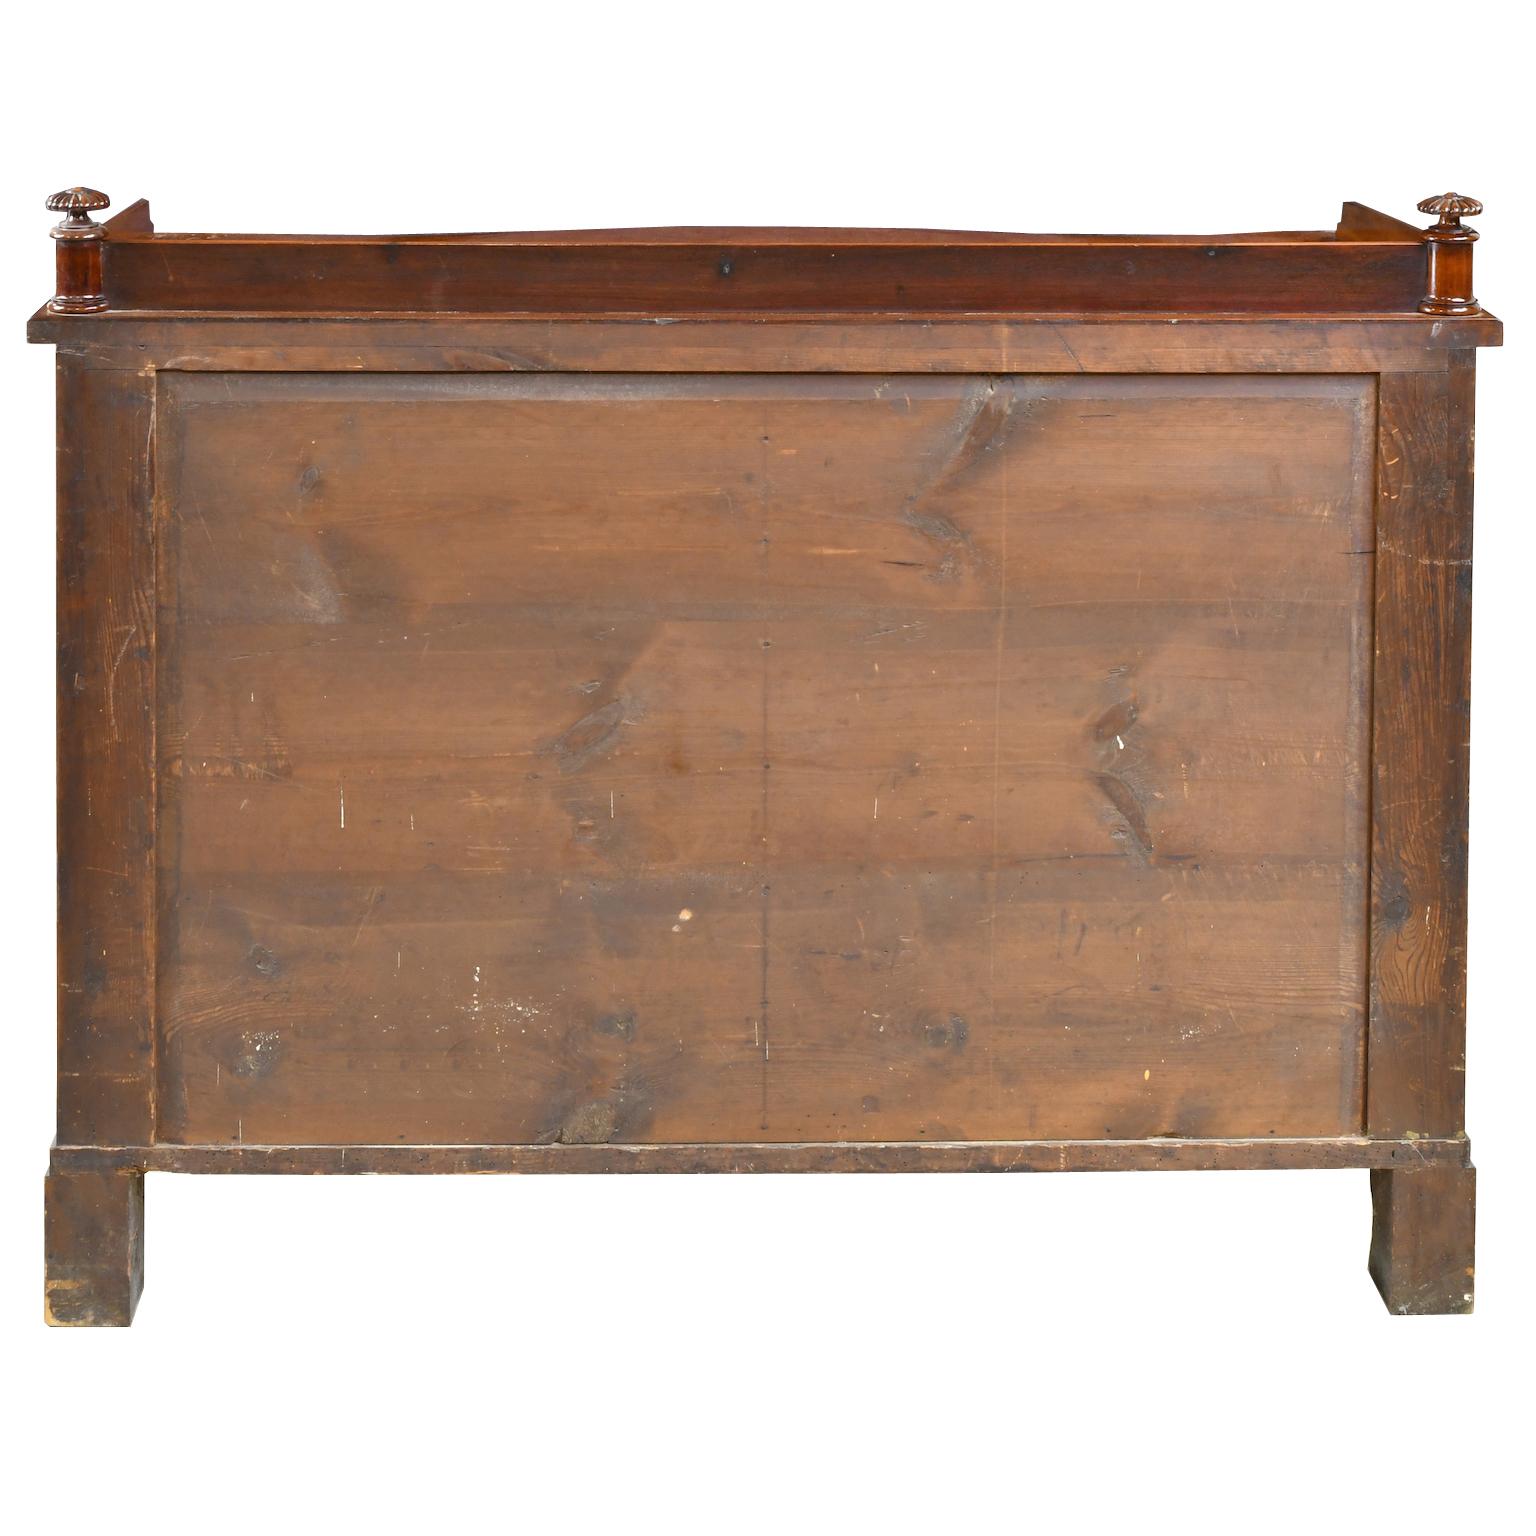 Christian VIII Serpentine-Front Sideboard in West Indies Mahogany, circa 1850 In Good Condition For Sale In Miami, FL